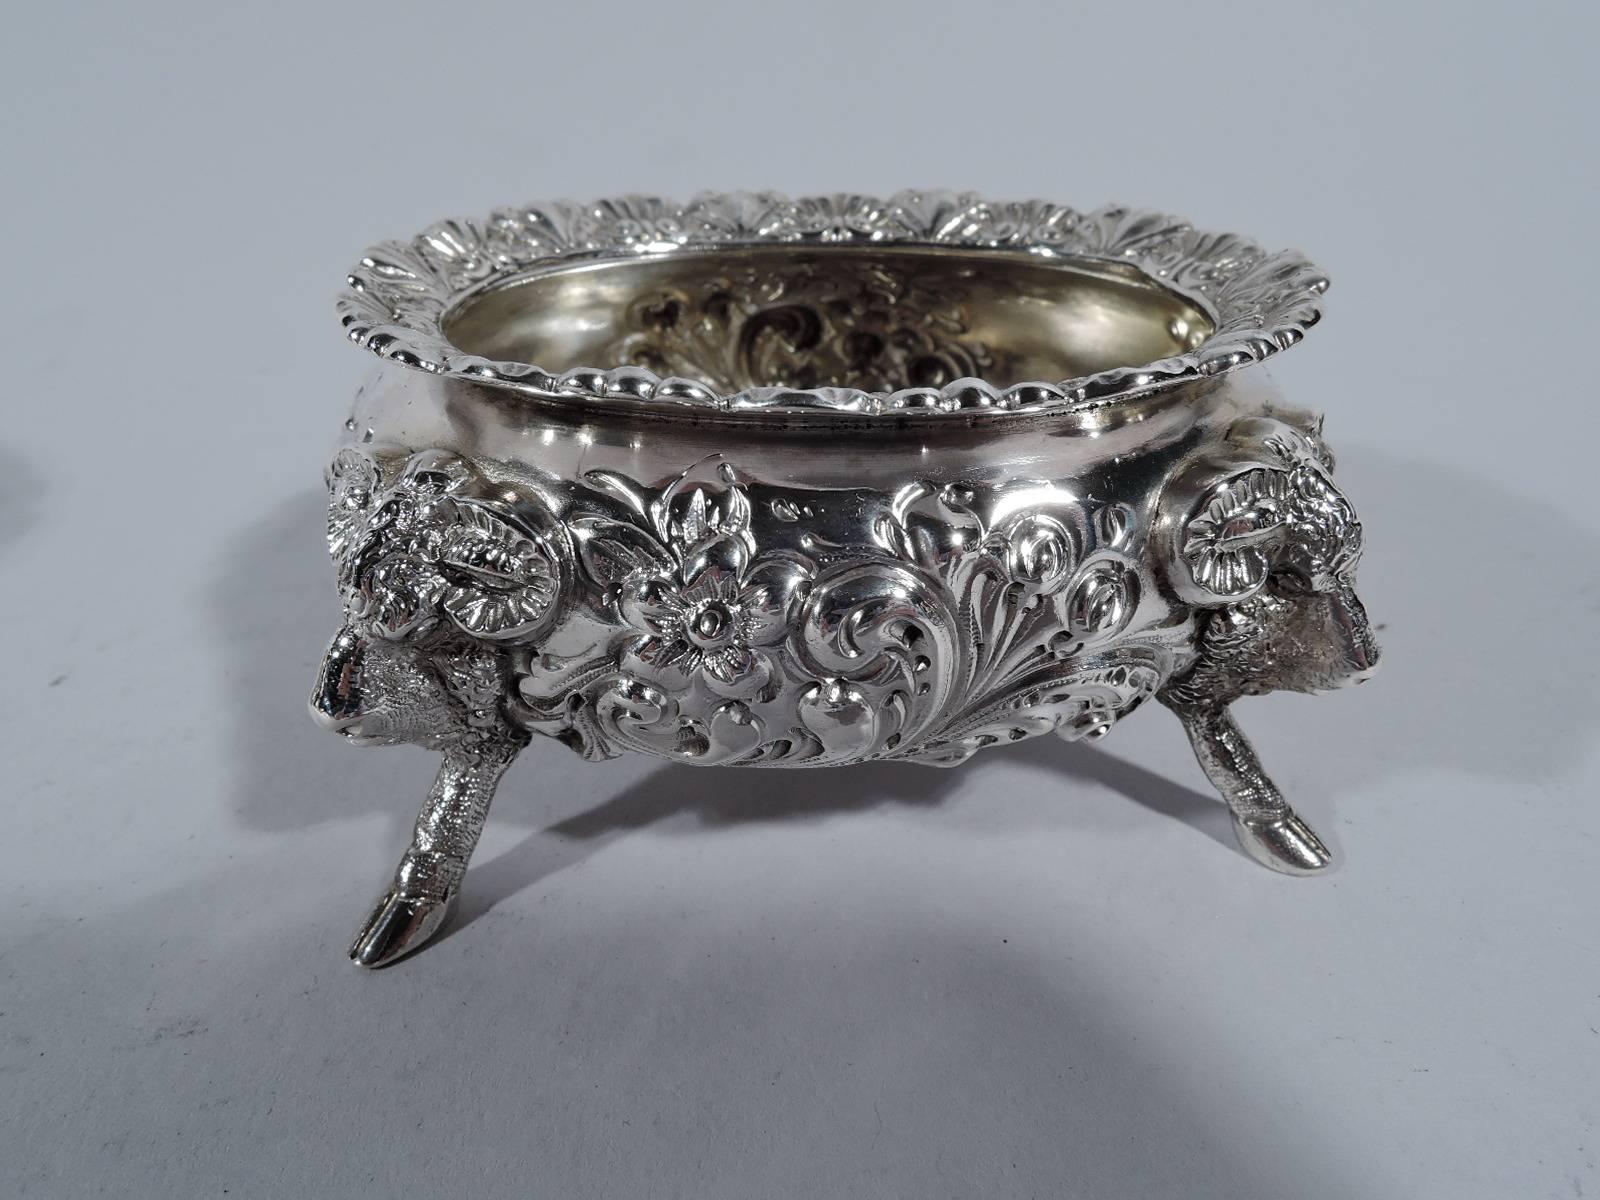 Pair of Neoclassical-style sterling silver open salts. Made by Howard in New York in 1897. Each: Bellied bowl with floral repousse and monopodia supports in form of ram’s head terminating in hoof. Interlaced script monogram engraved on underside.